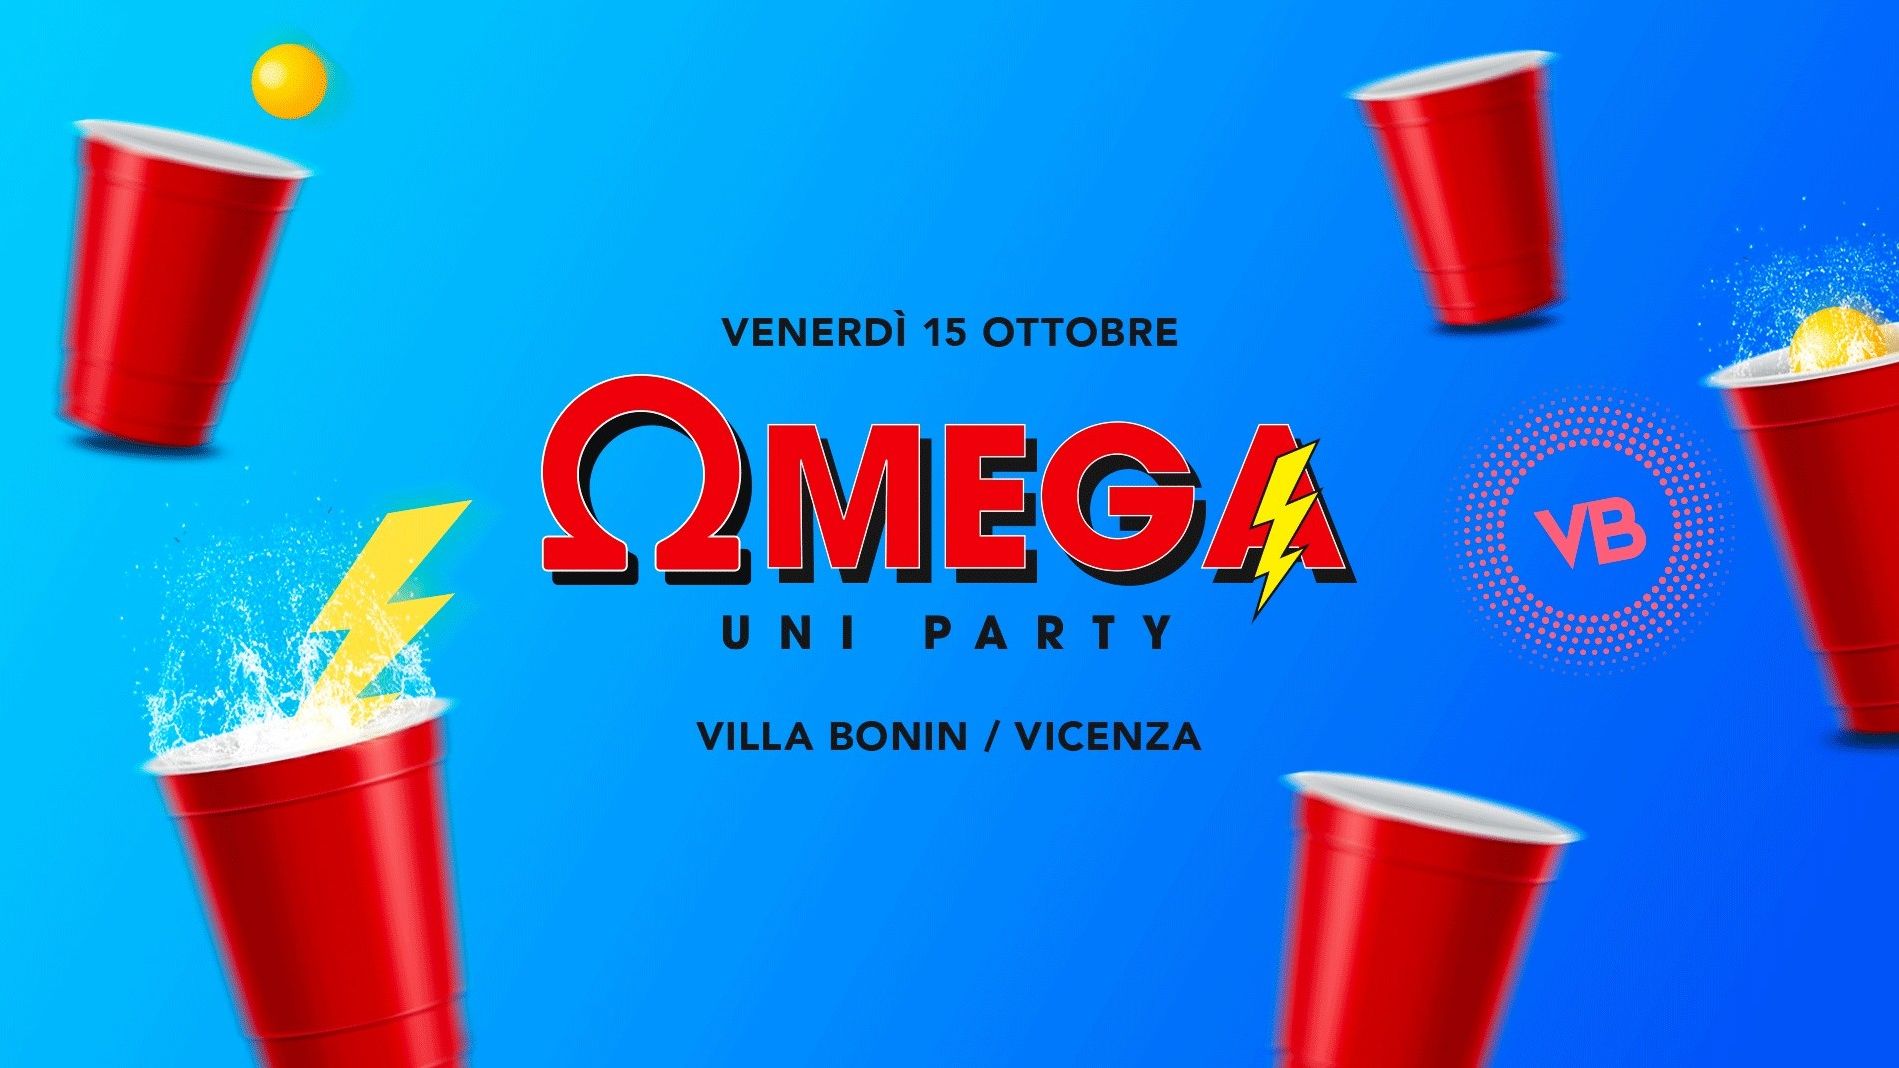 OMEGA Ω UniParty